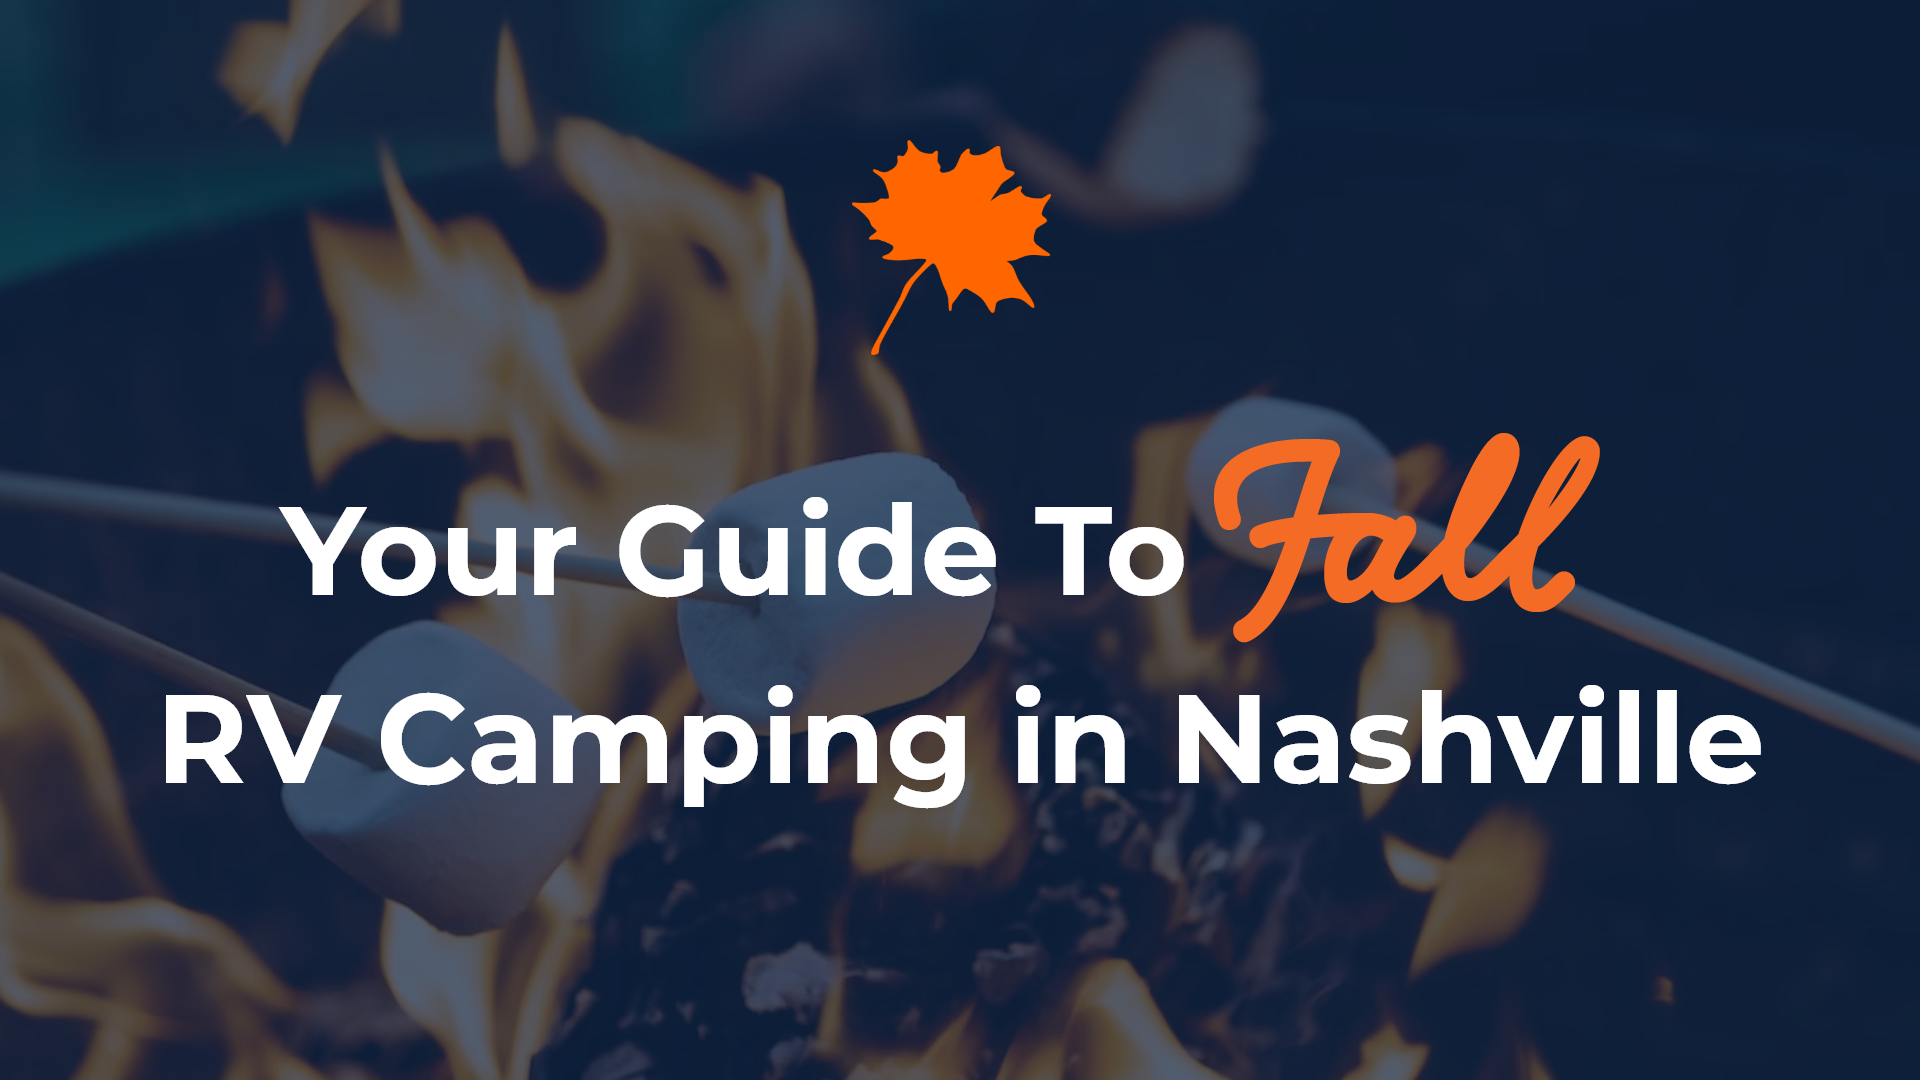 Your Guide to Fall RV Camping in Nashville